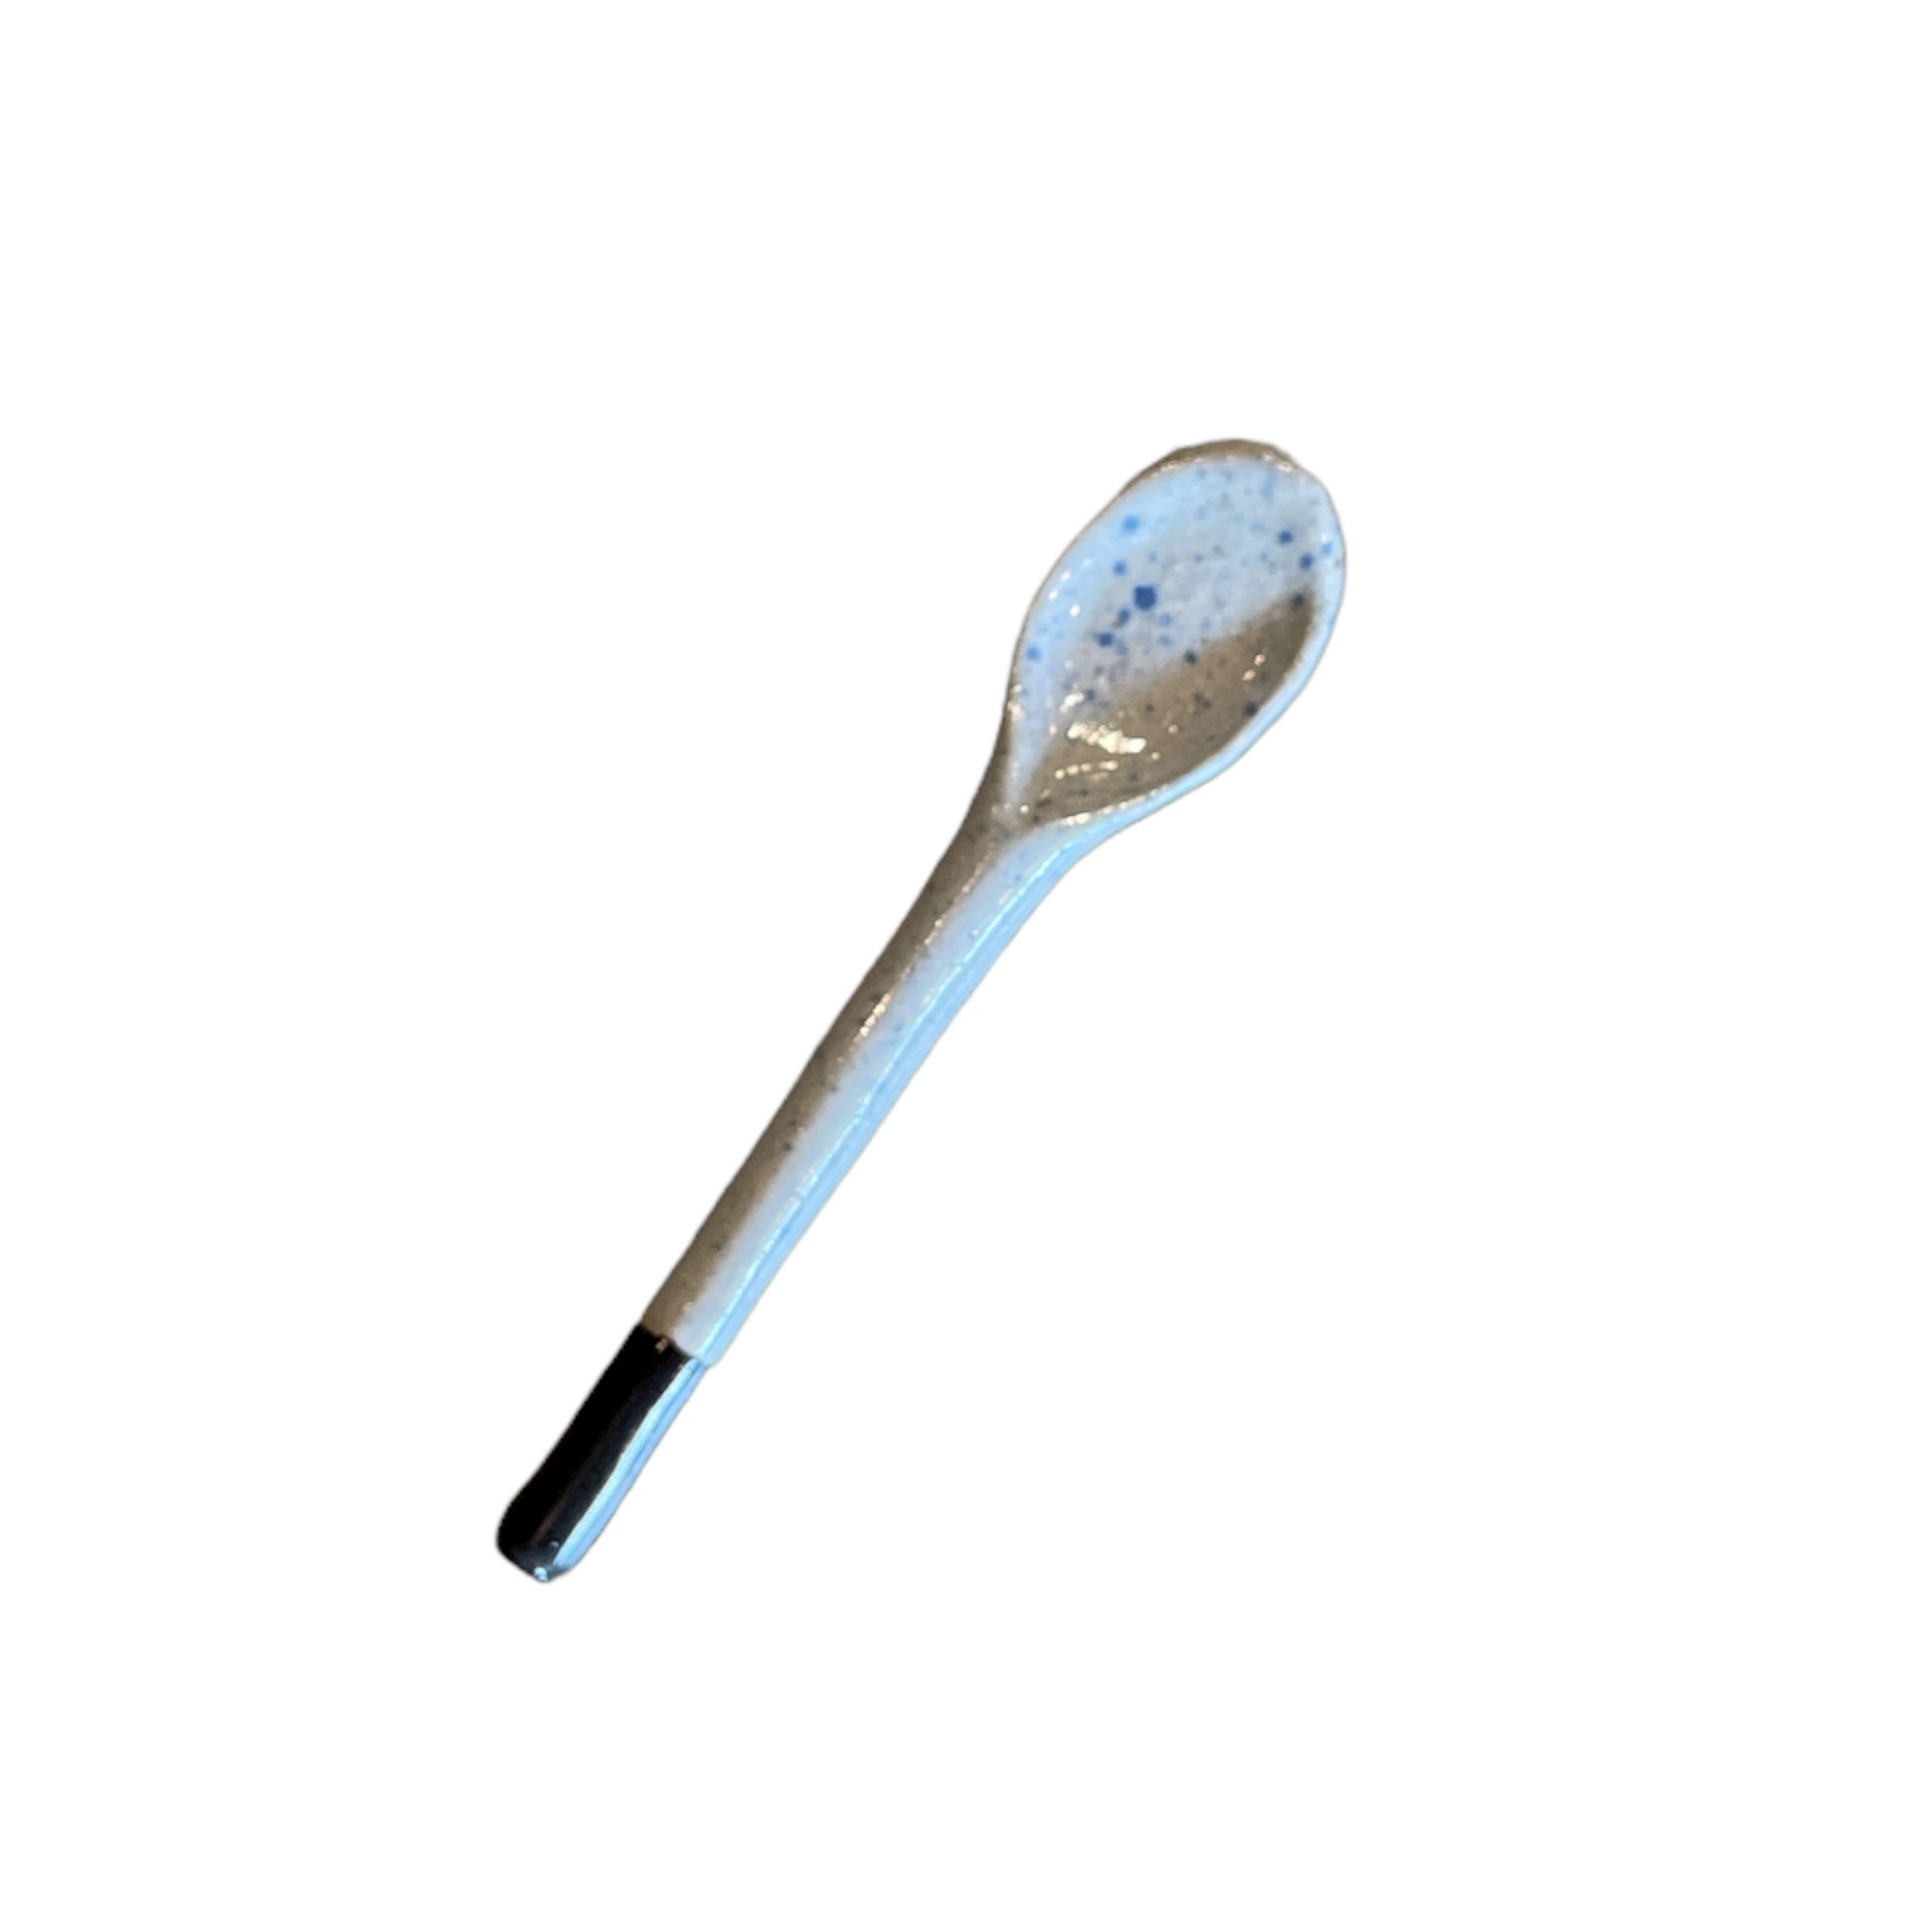 This divine Handcrafted Teman Ceramic Small Spoon will add charm to any table.